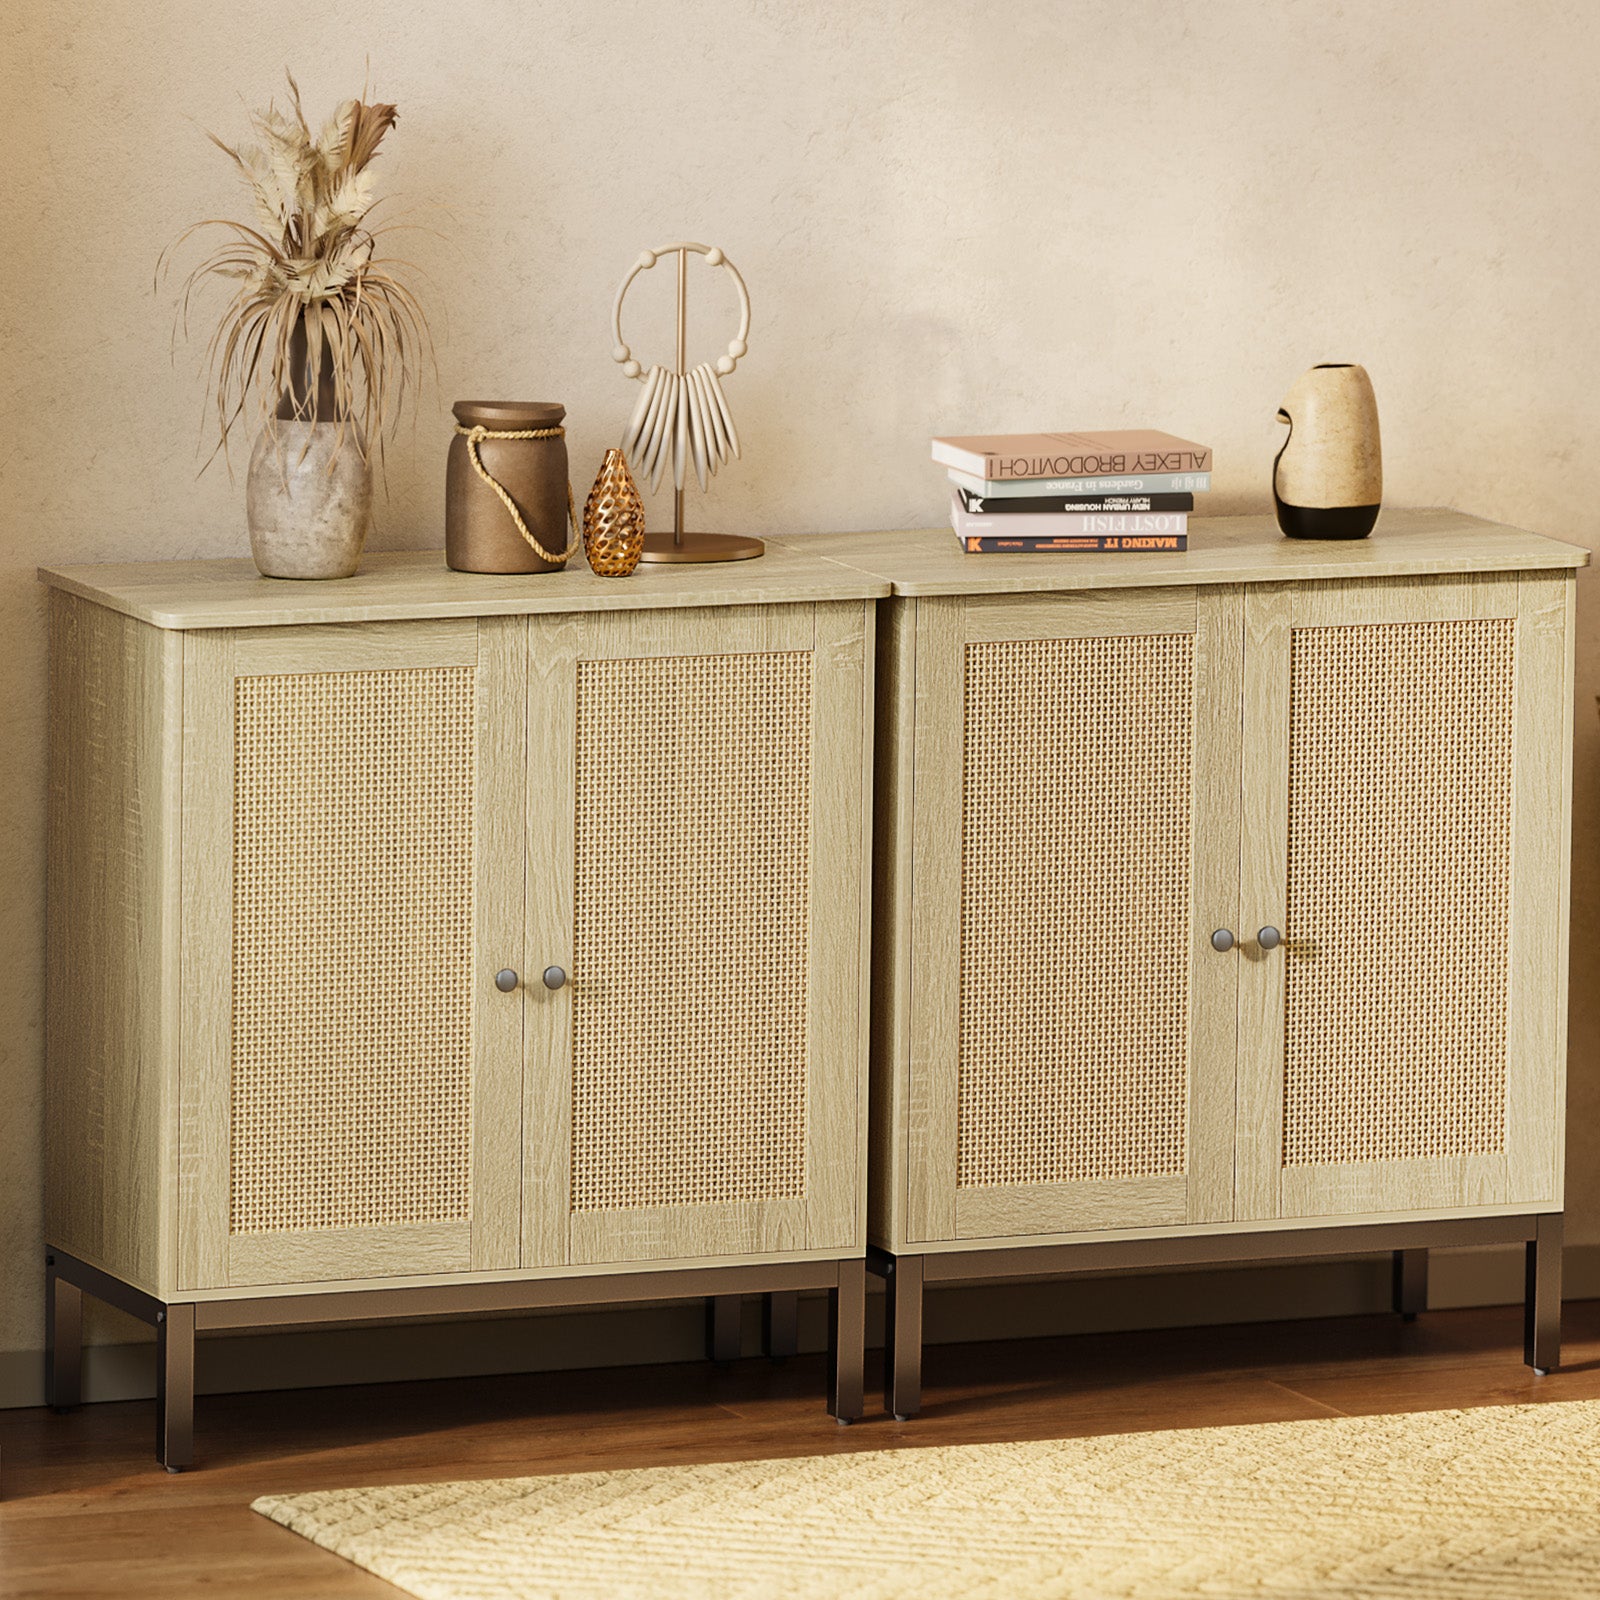 Gizoon AP50 Accent Sideboard Buffet Storage Cabinet with Rattan Doors